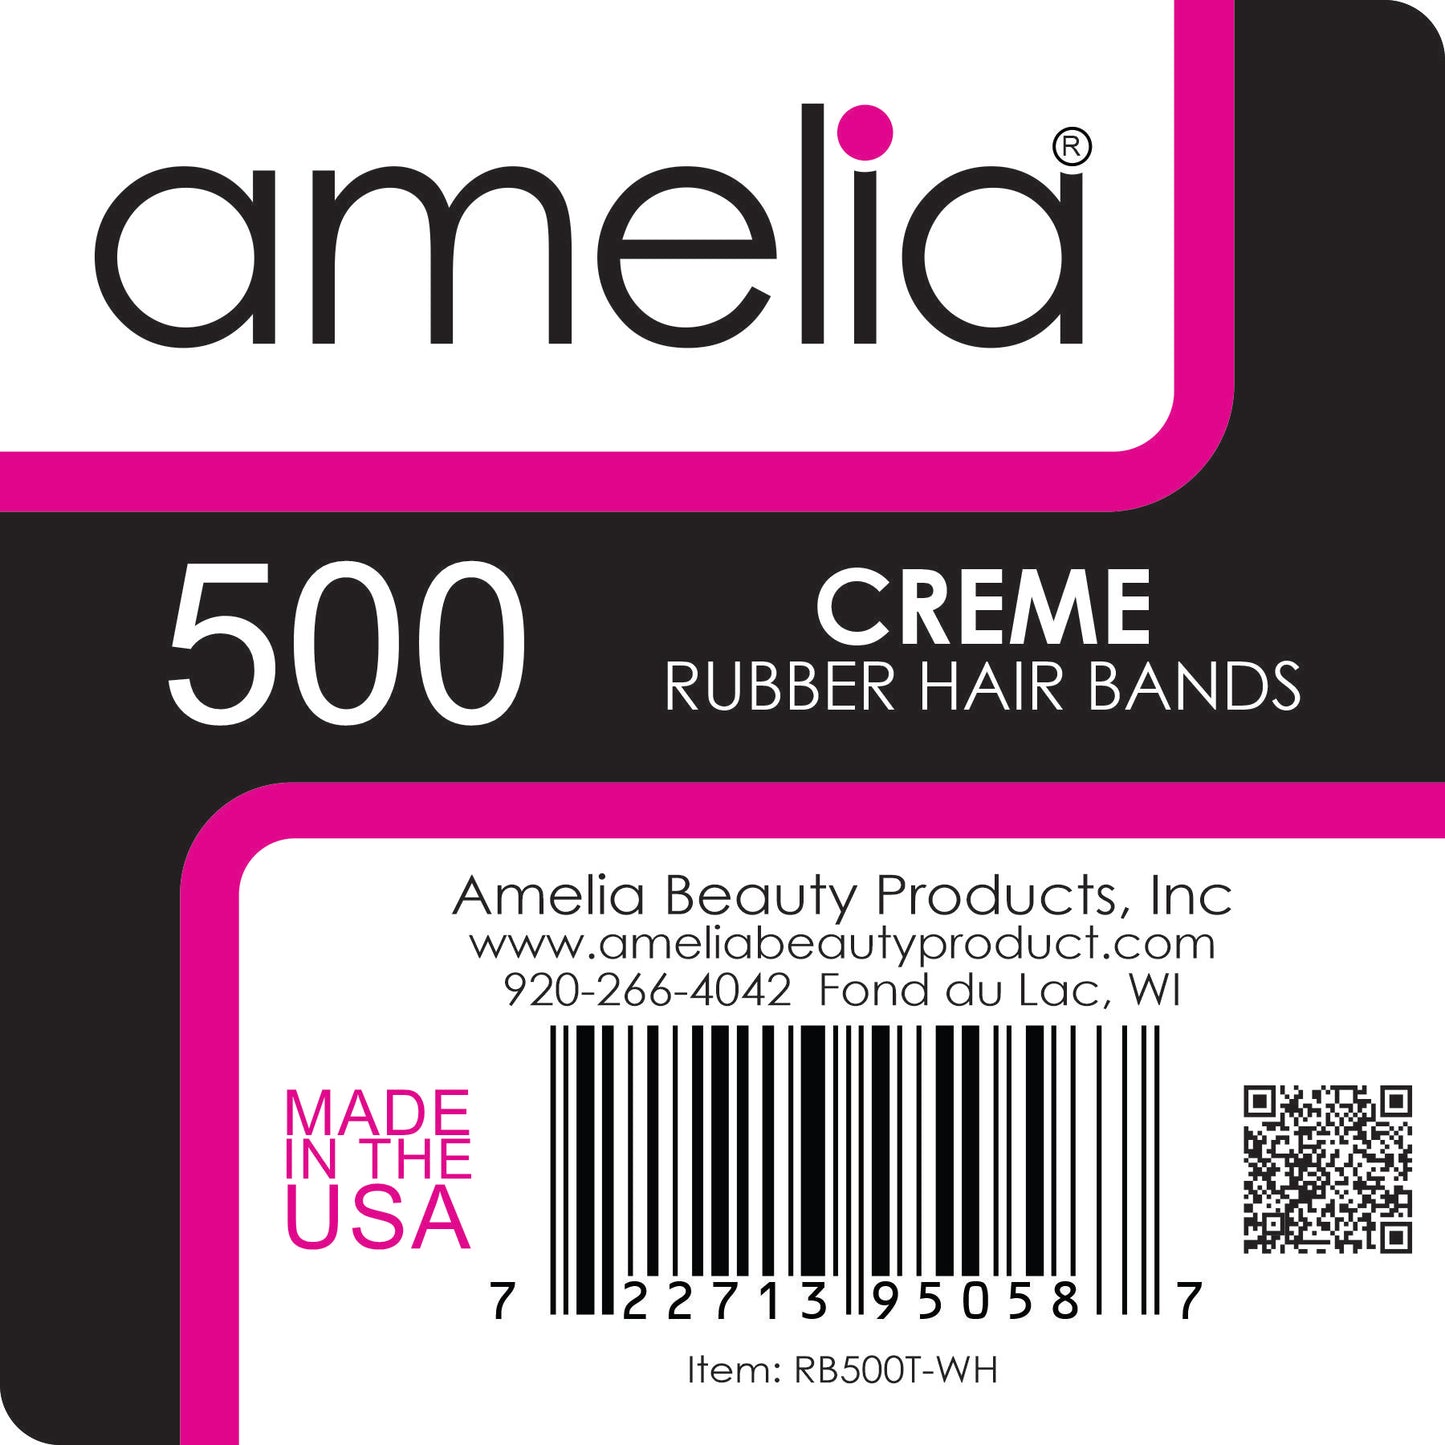 Amelia Beauty | 1/2in, Creme, Elastic Rubber Band Pony Tail Holders | Made in USA, Ideal for Ponytails, Braids, Twists, Dreadlocks, Styling Accessories for Women, Men and Girls | 500 Pack